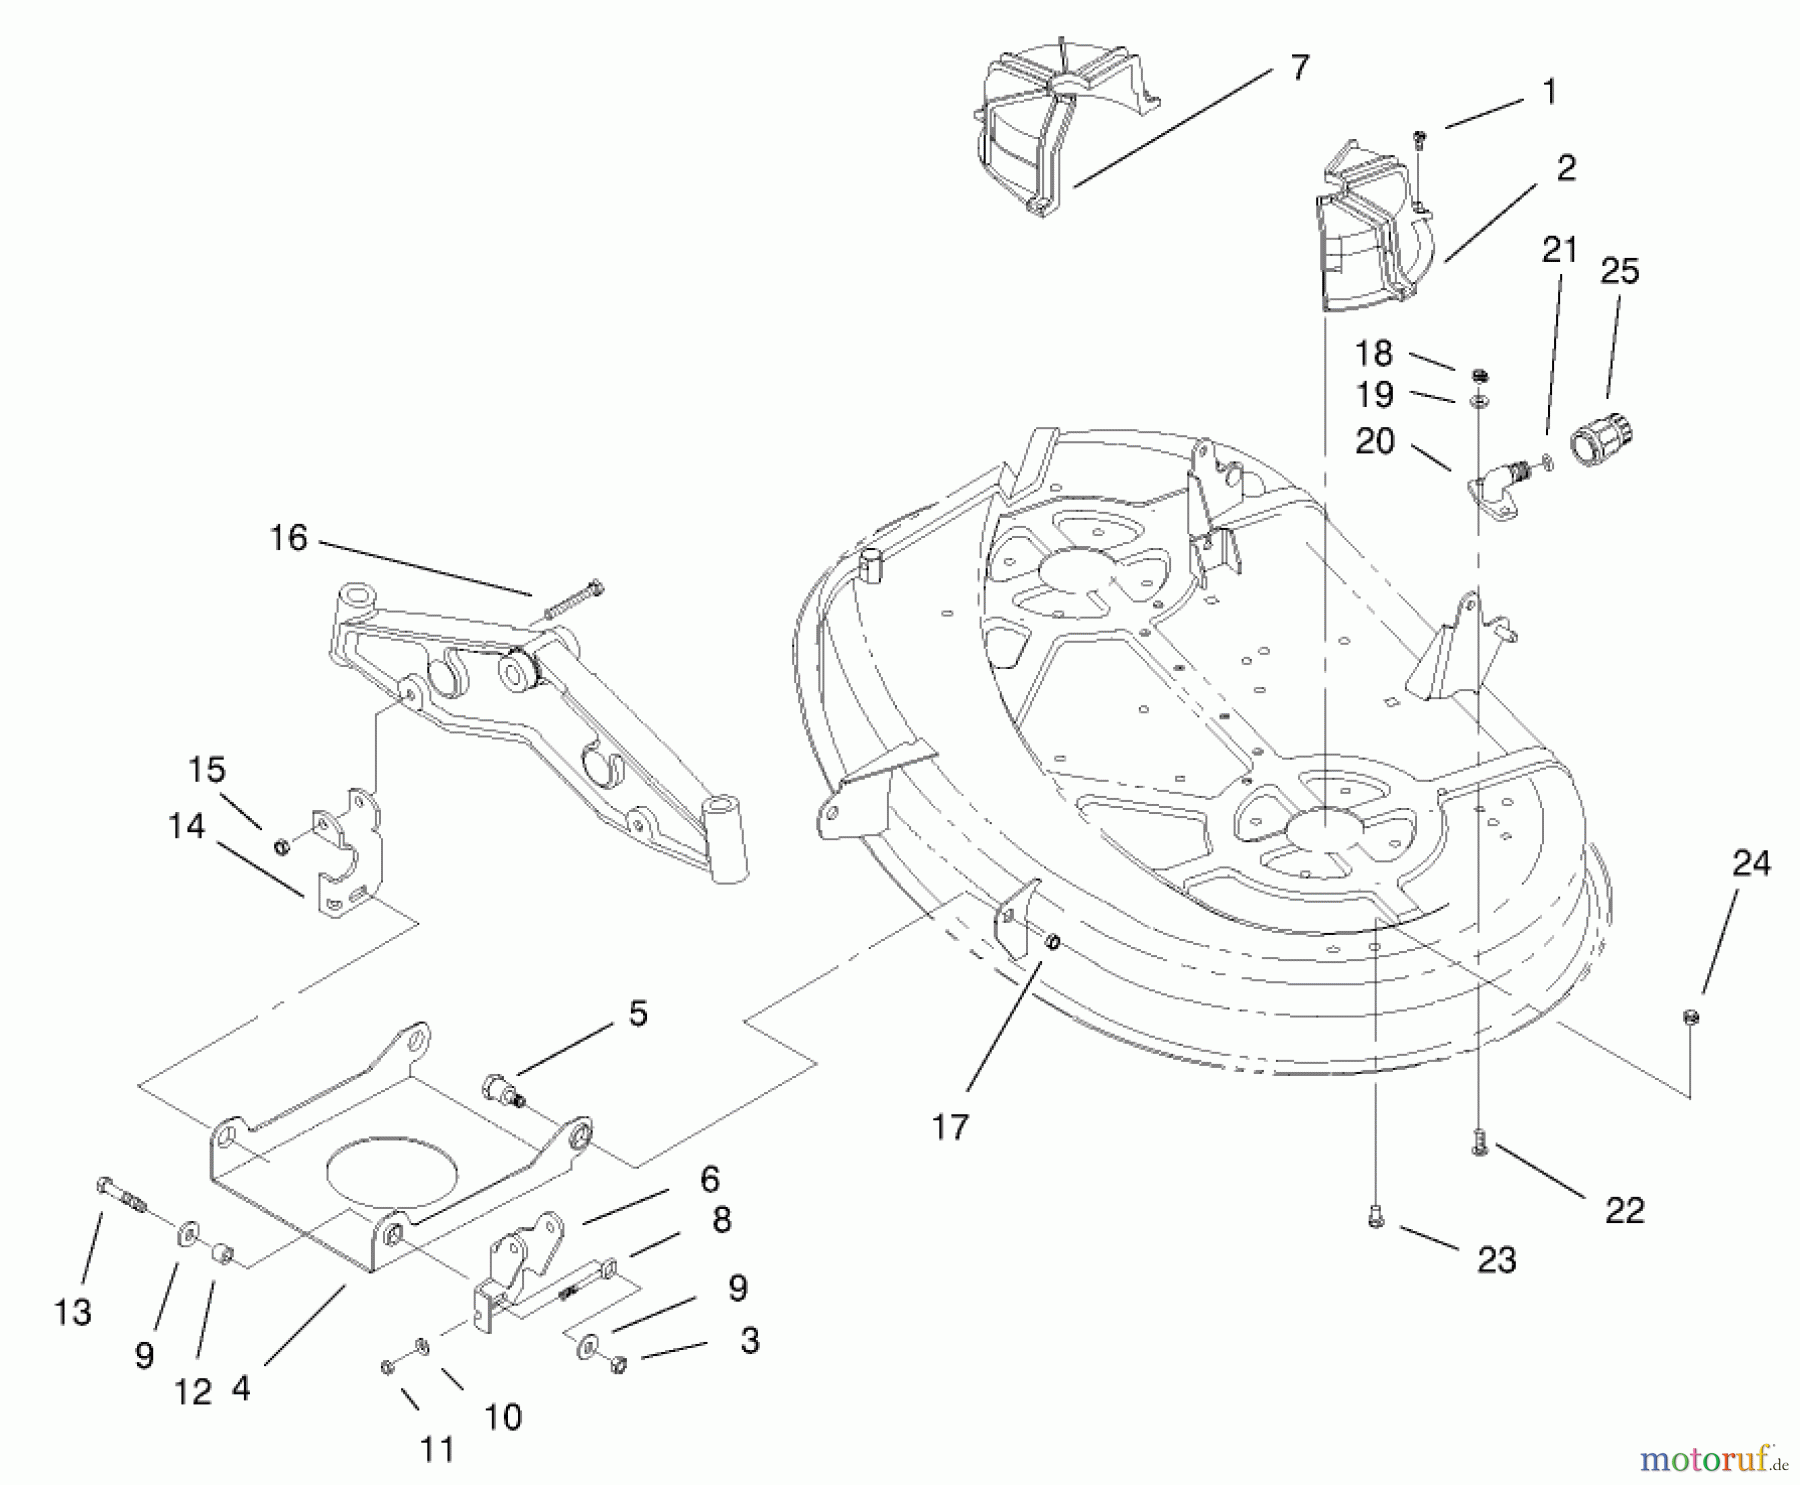  Toro Neu Mowers, Lawn & Garden Tractor Seite 1 71226 (16-38XLE) - Toro 16-38XLE Lawn Tractor, 2000 (200000001-200999999) HEIGHT OF CUT COMPONENTS ASSEMBLY #3